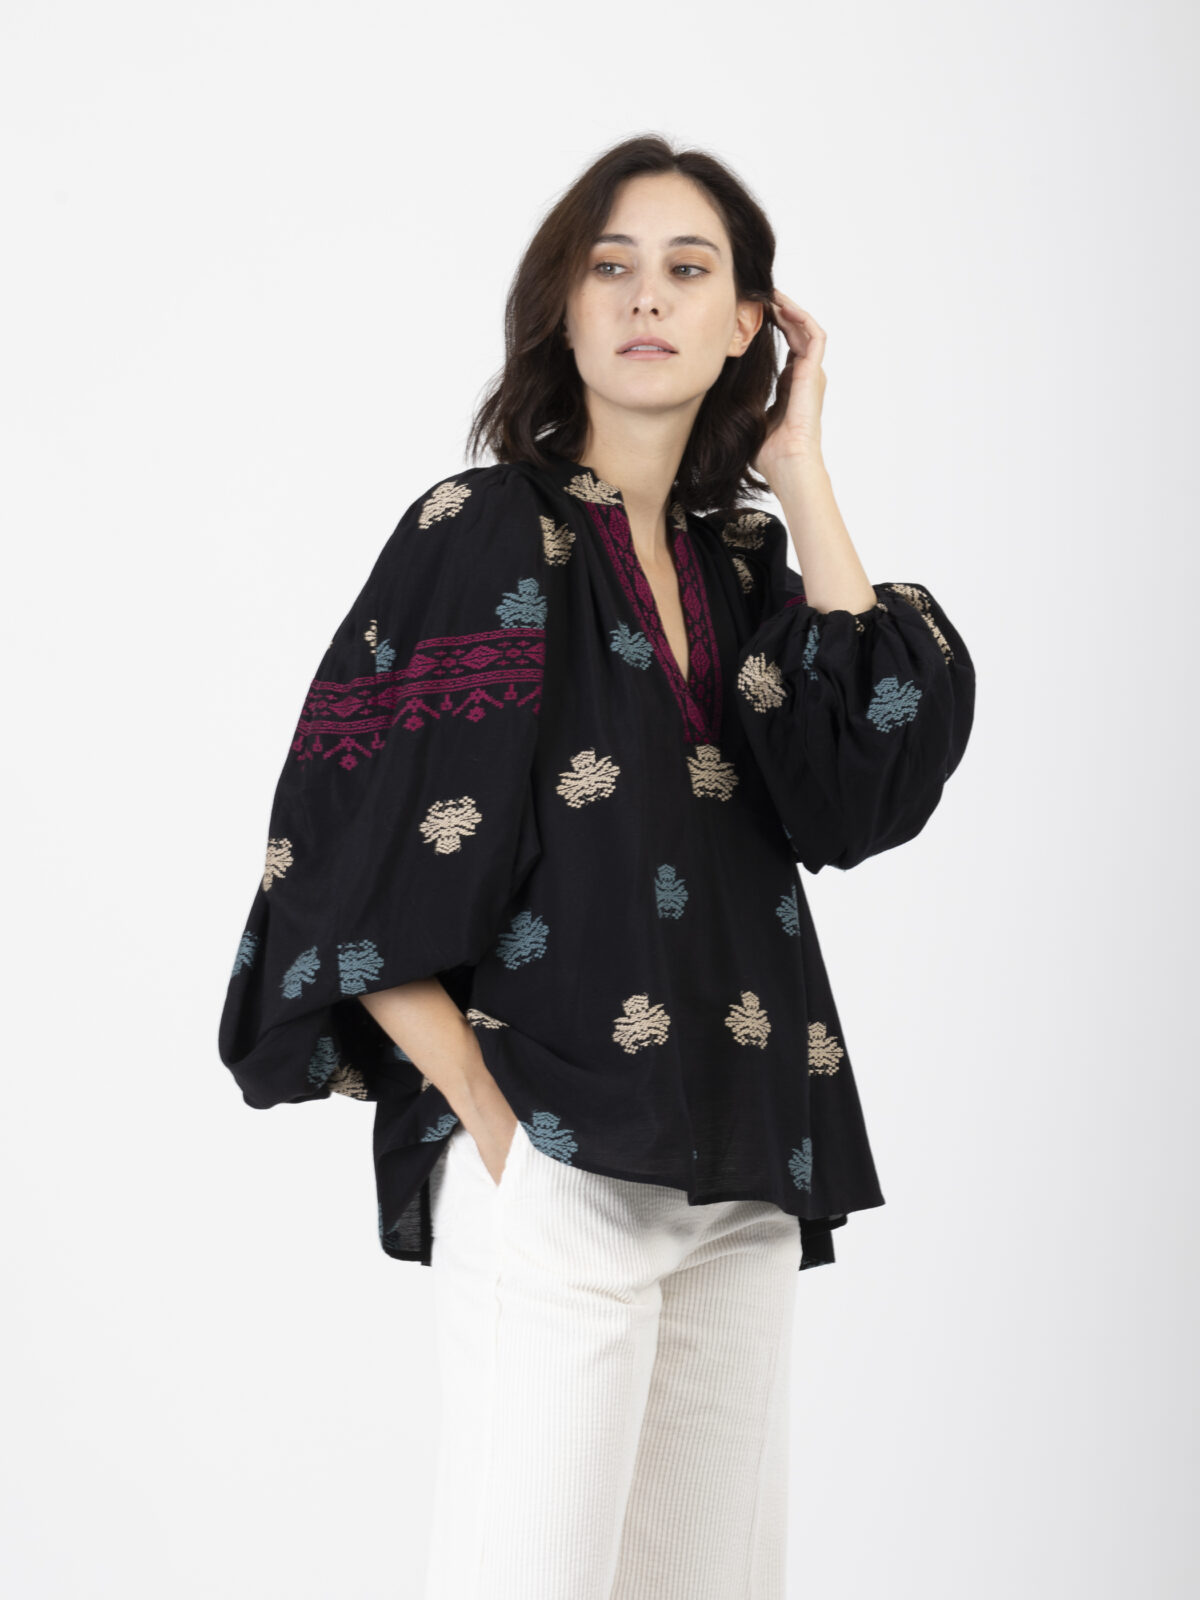 bell-blouse-vanessa-bruno-embroidery-puffy-sleeves-matchboxathens